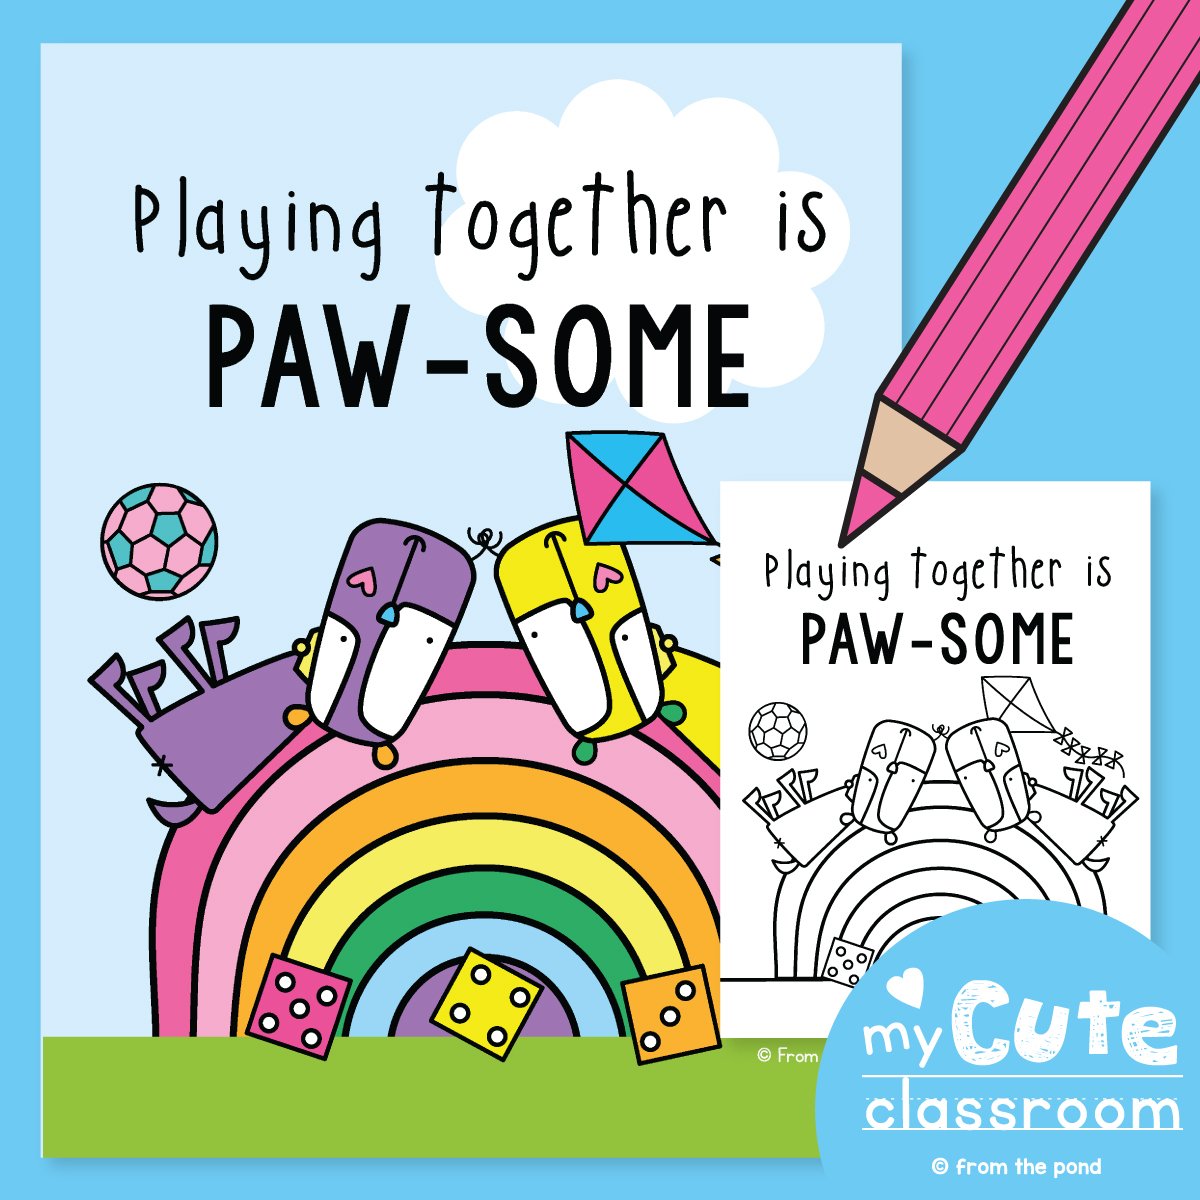 Paw-some Play